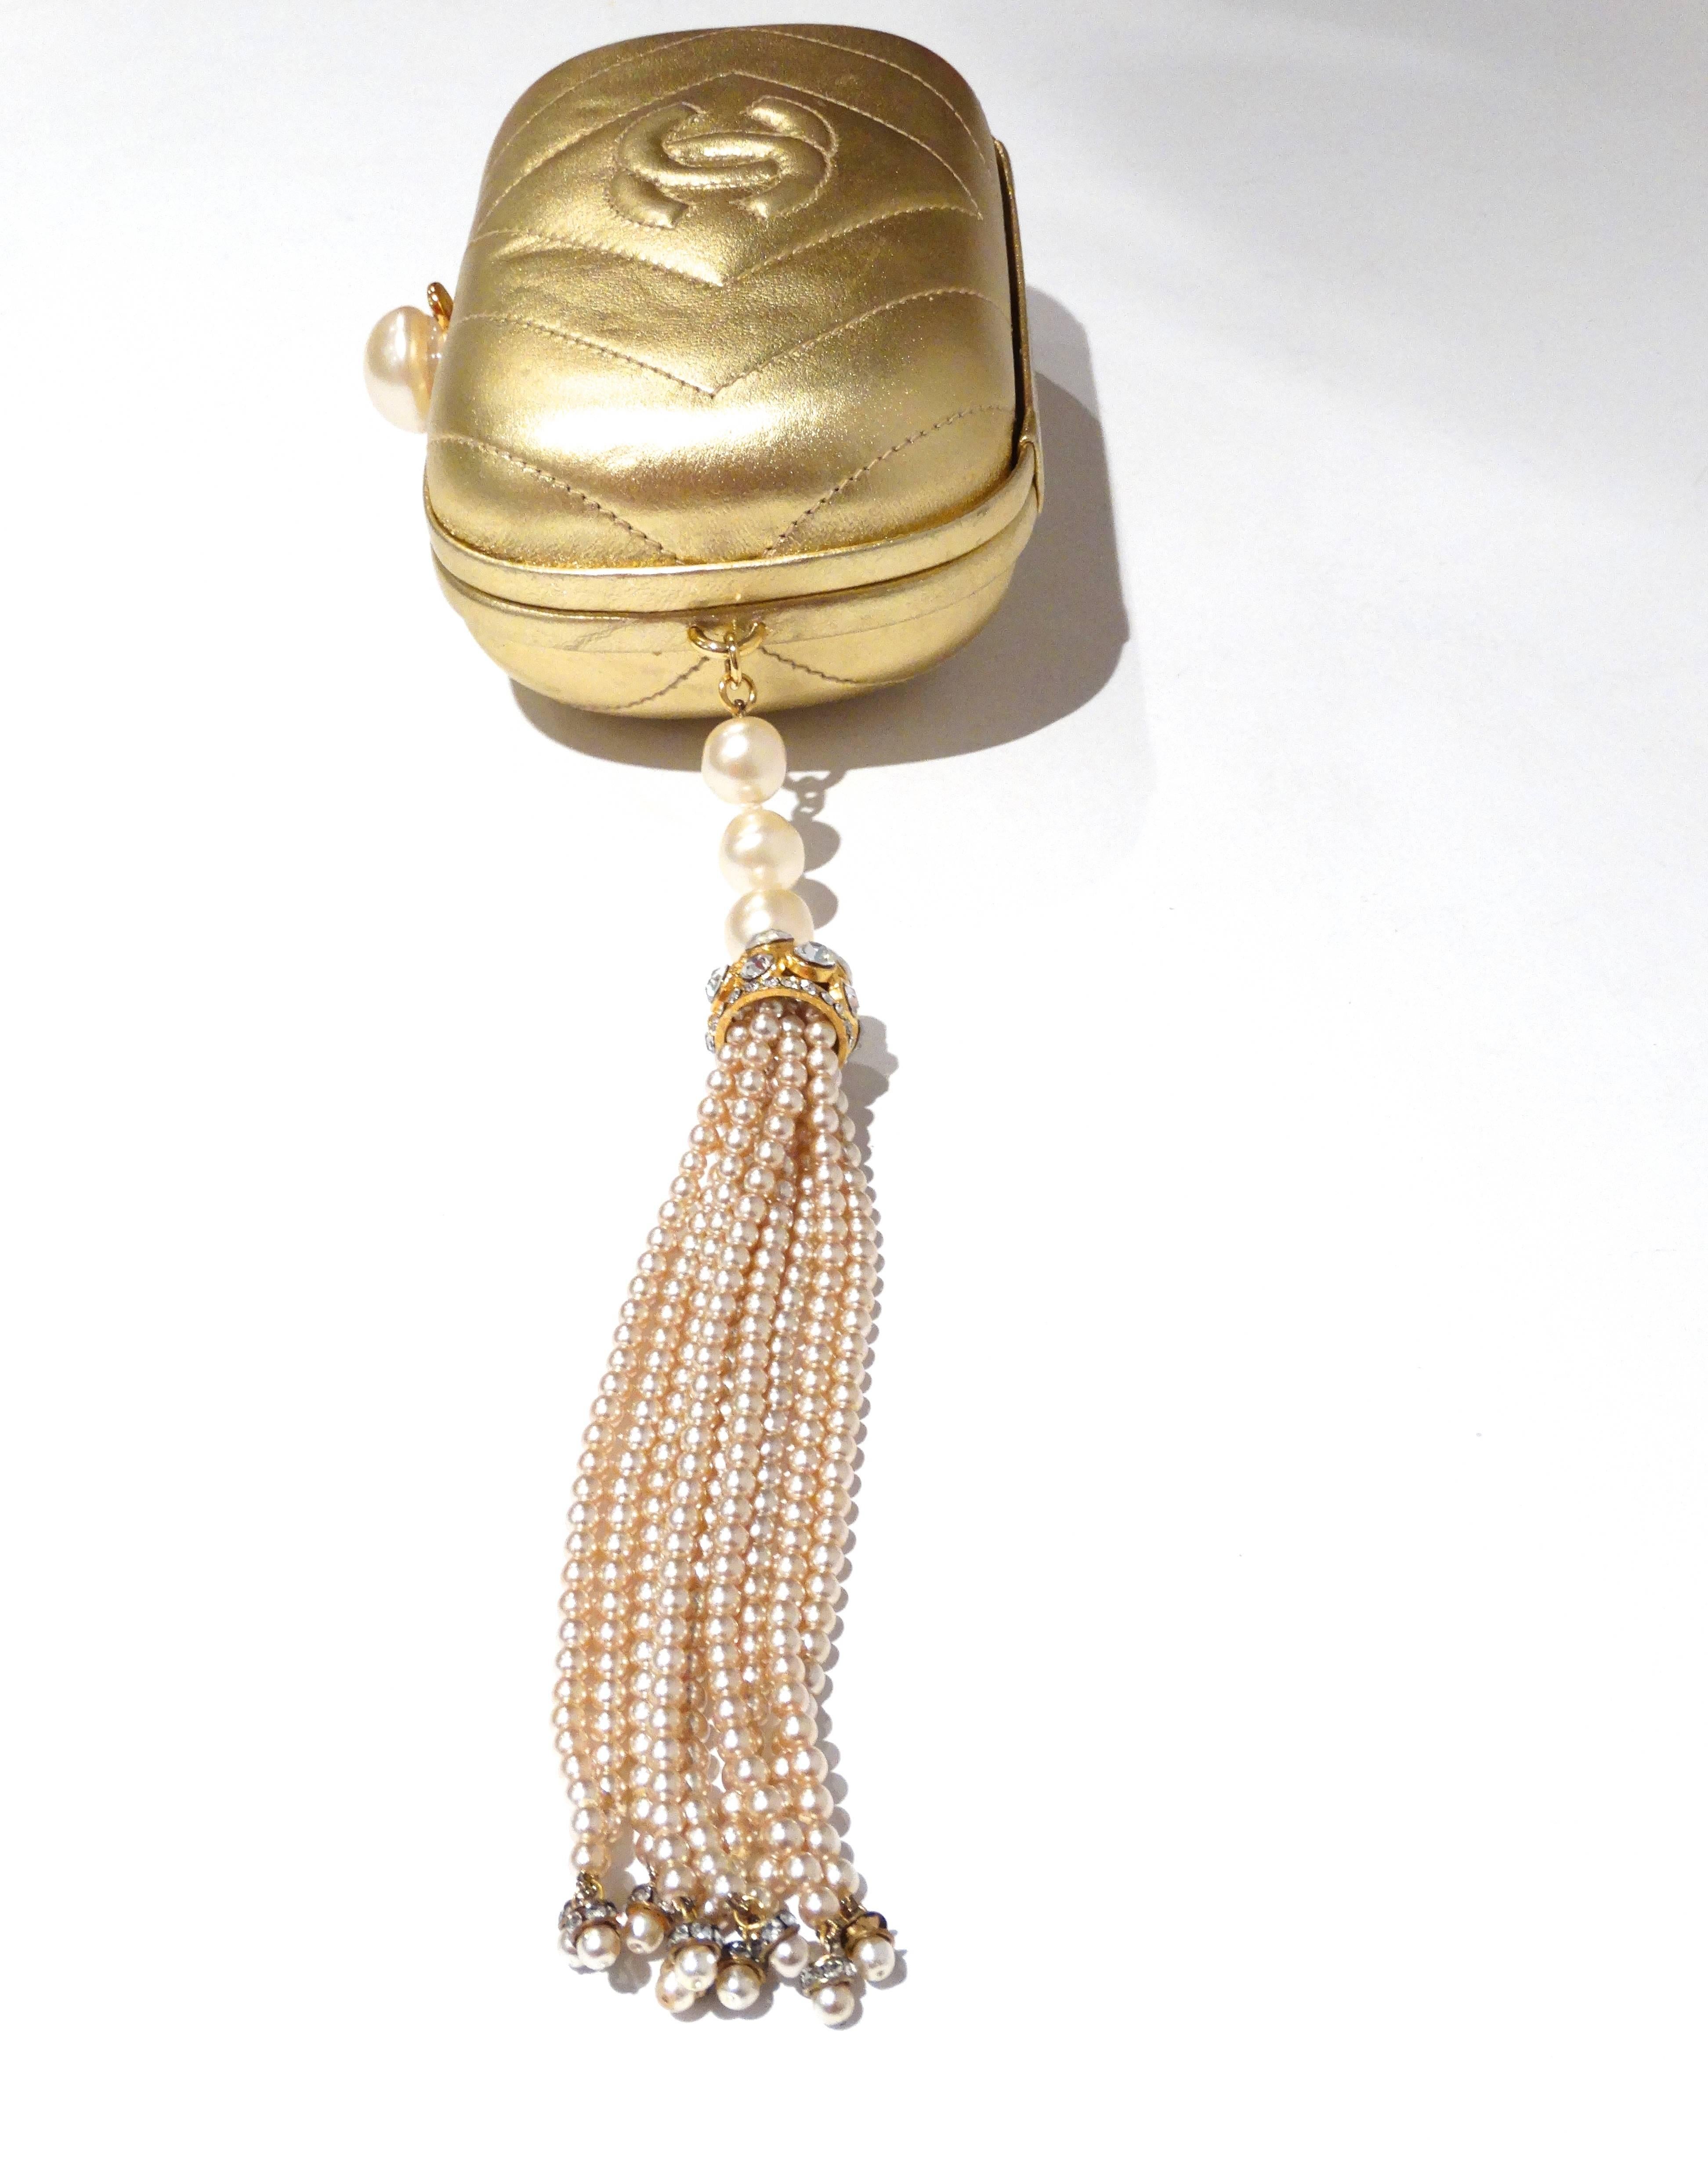 Women's 1980s Gold Chanel Clutch with Pearl Tassel 